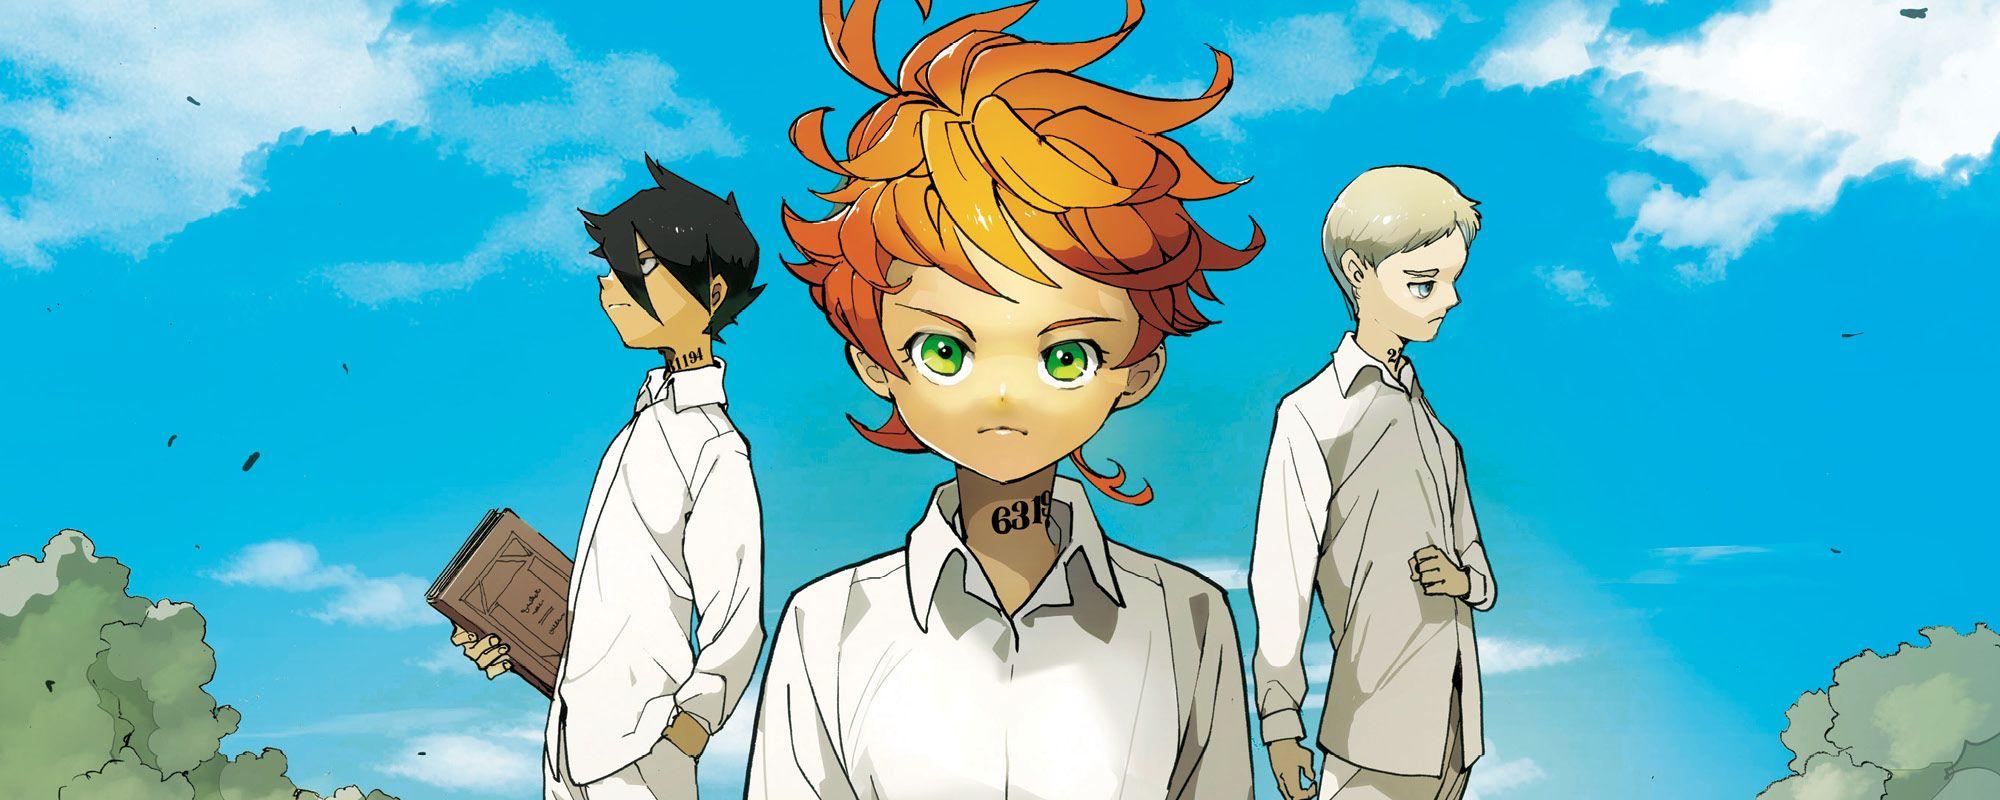 THE PROMISED NEVERLAND Anime Series Reveals New Commercial